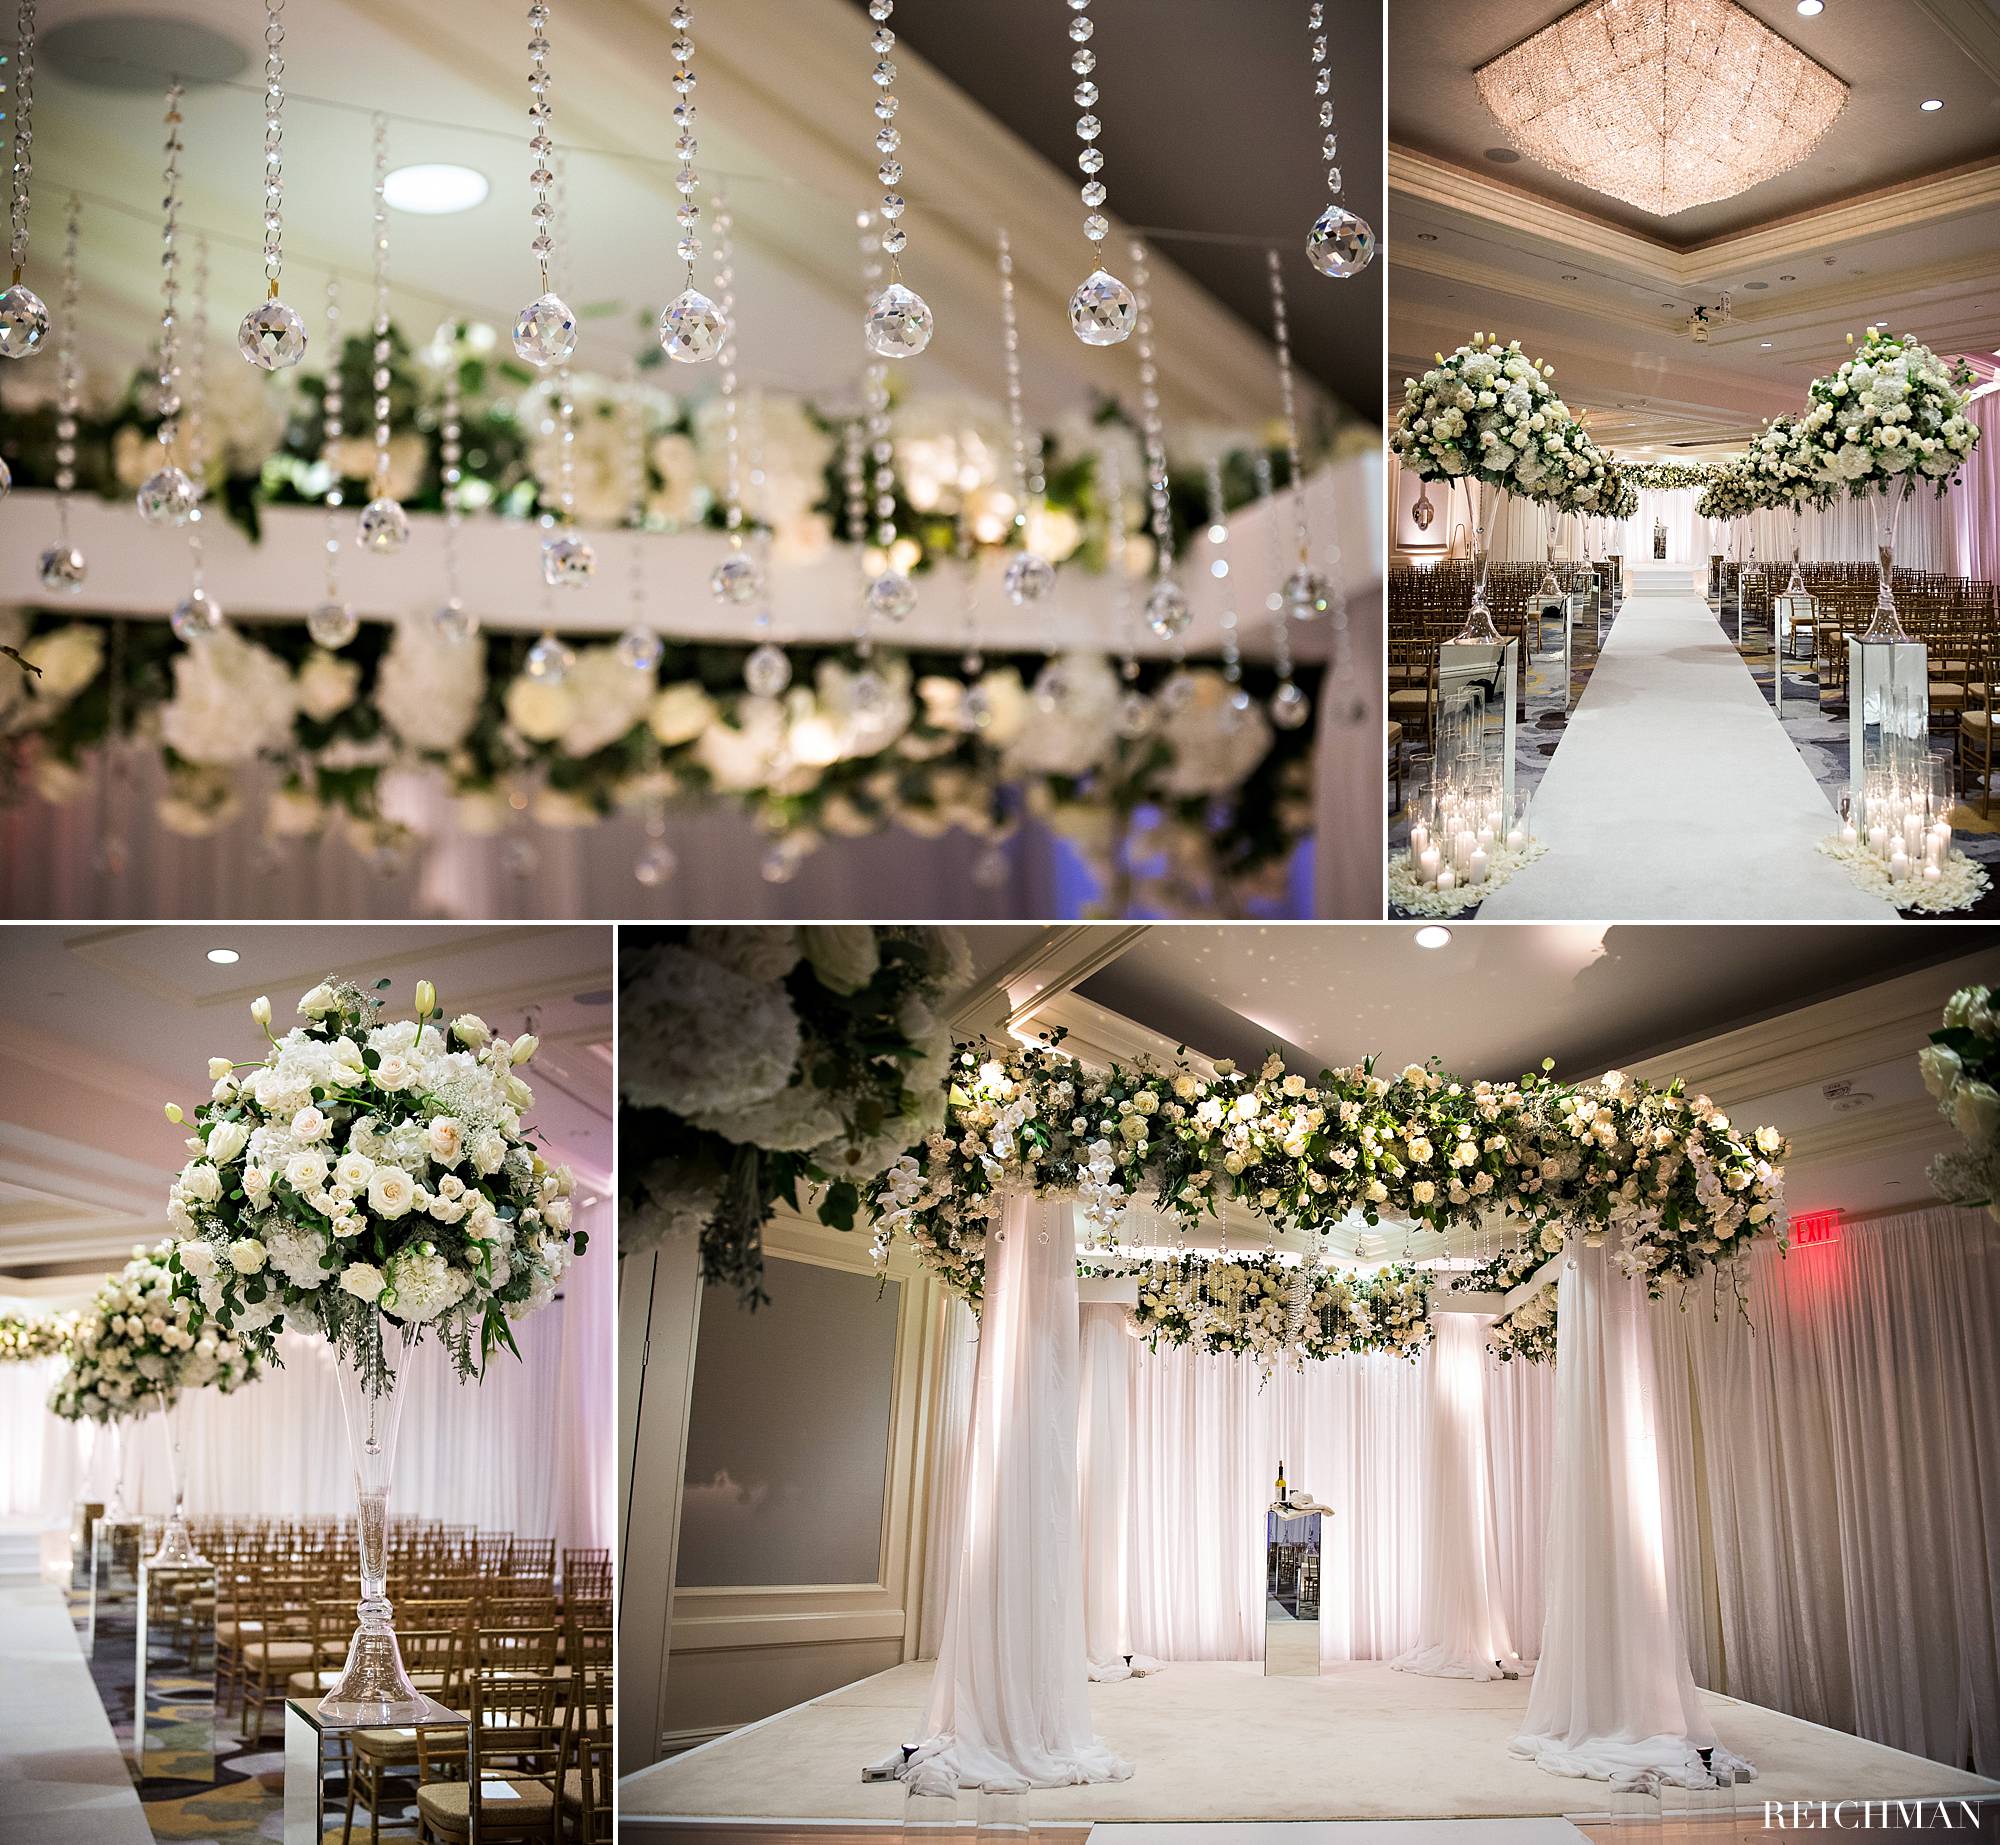 White and green floral Chuppah